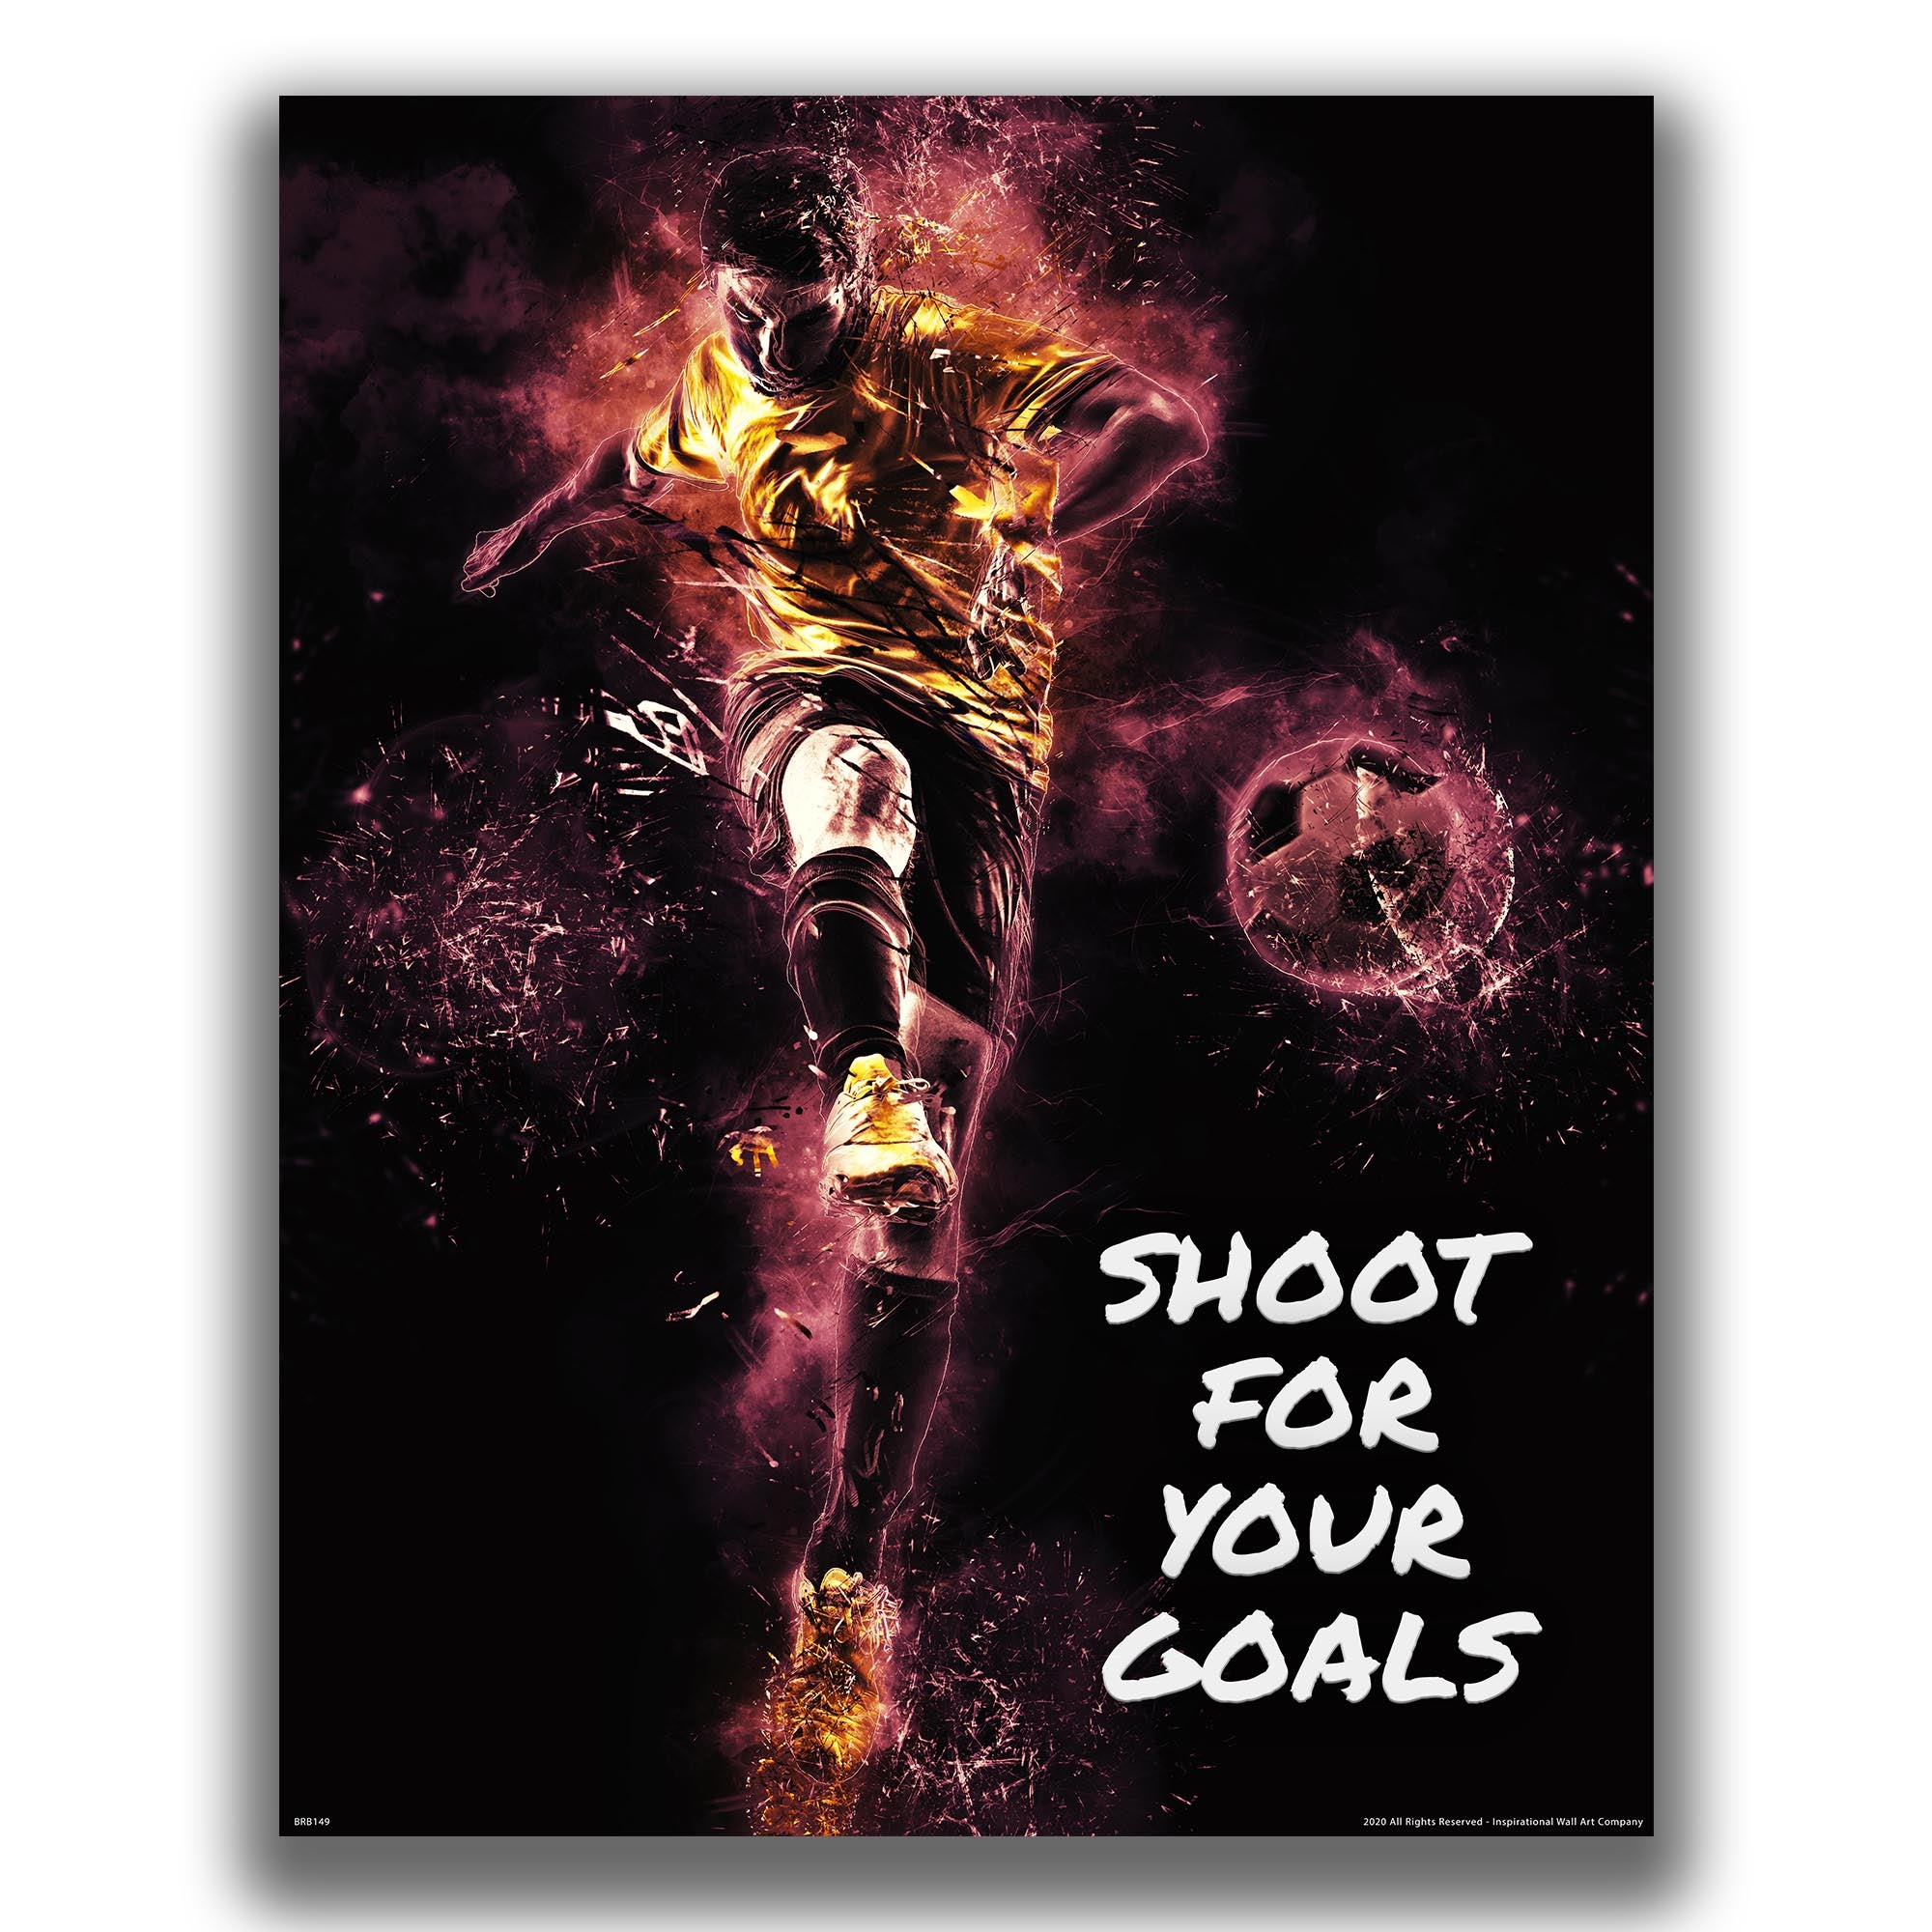 Shoot For Your Goals - Soccer Poster